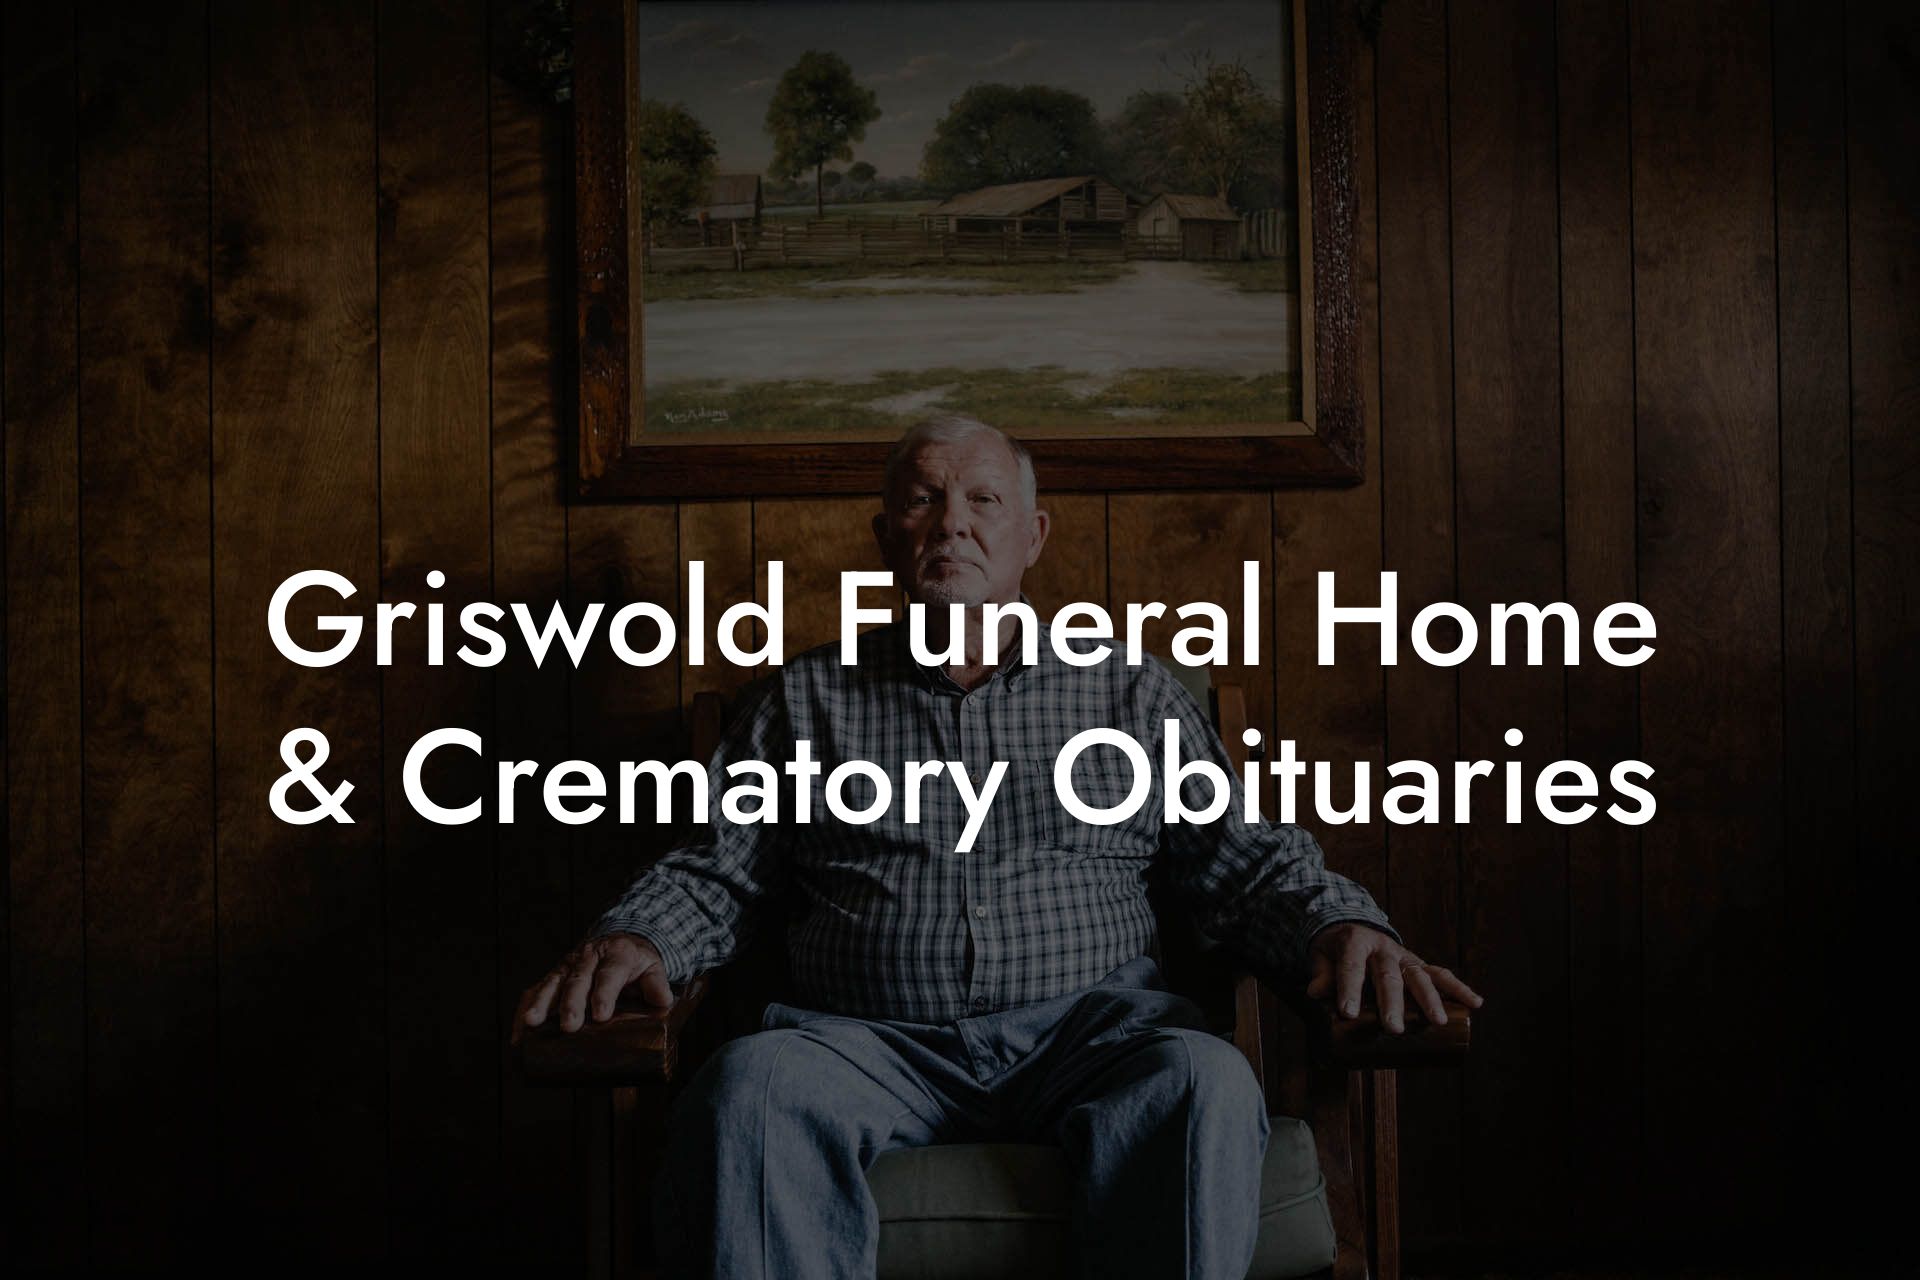 Griswold Funeral Home & Crematory Obituaries